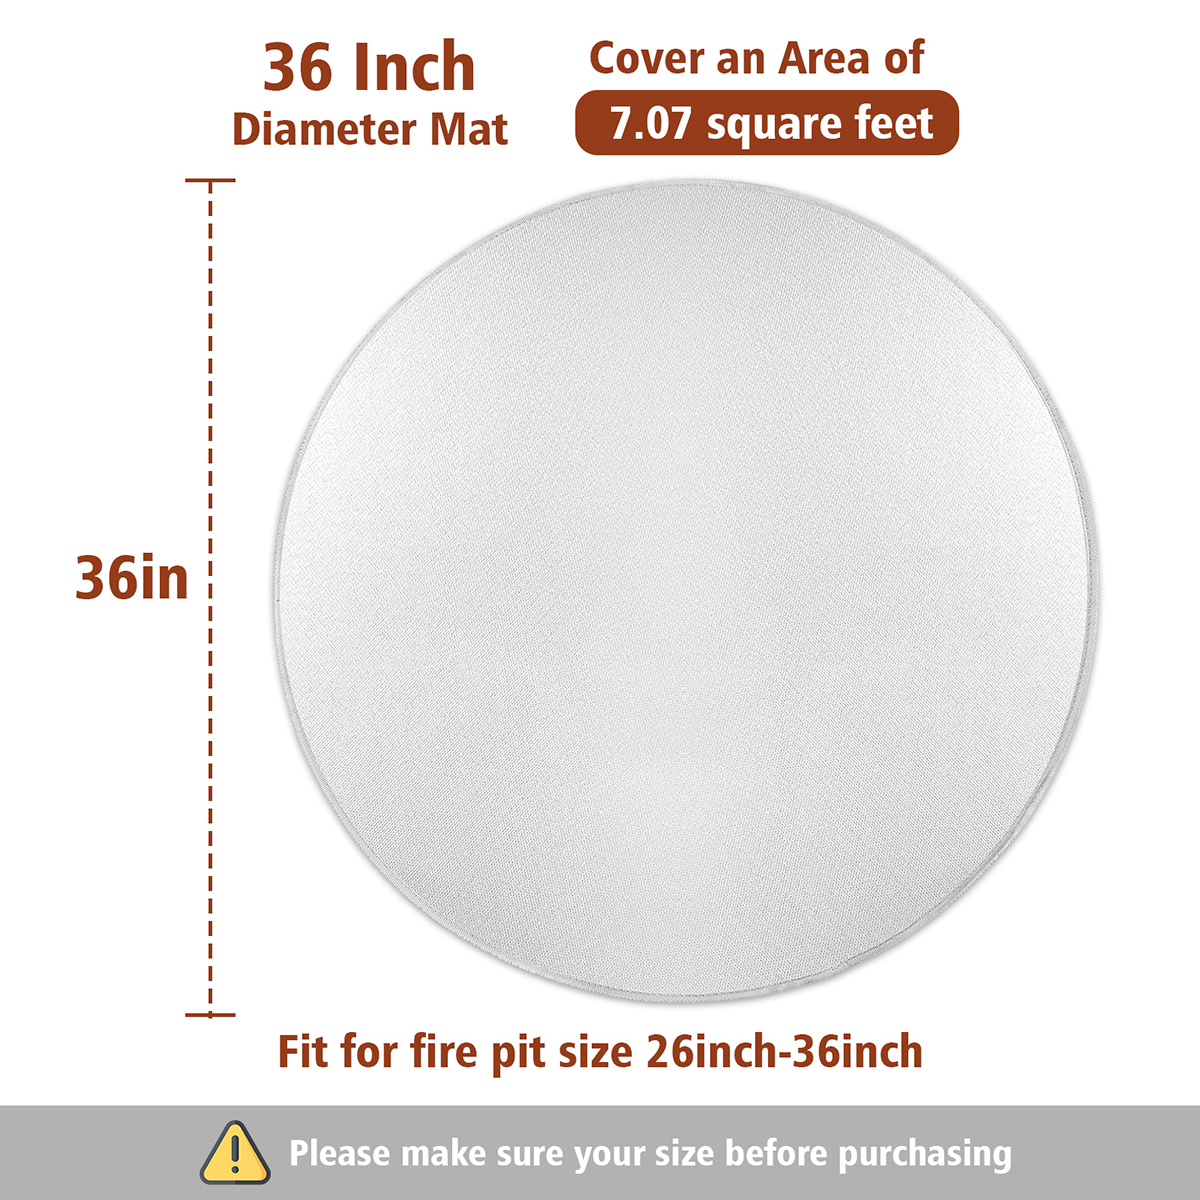 KINGSO-2436In-Fire-Pit-Mat-Round-Fireproof-High-Temperature-Resistant-Moisutre-proof-Mat-for-Deck-Pa-1890286-10